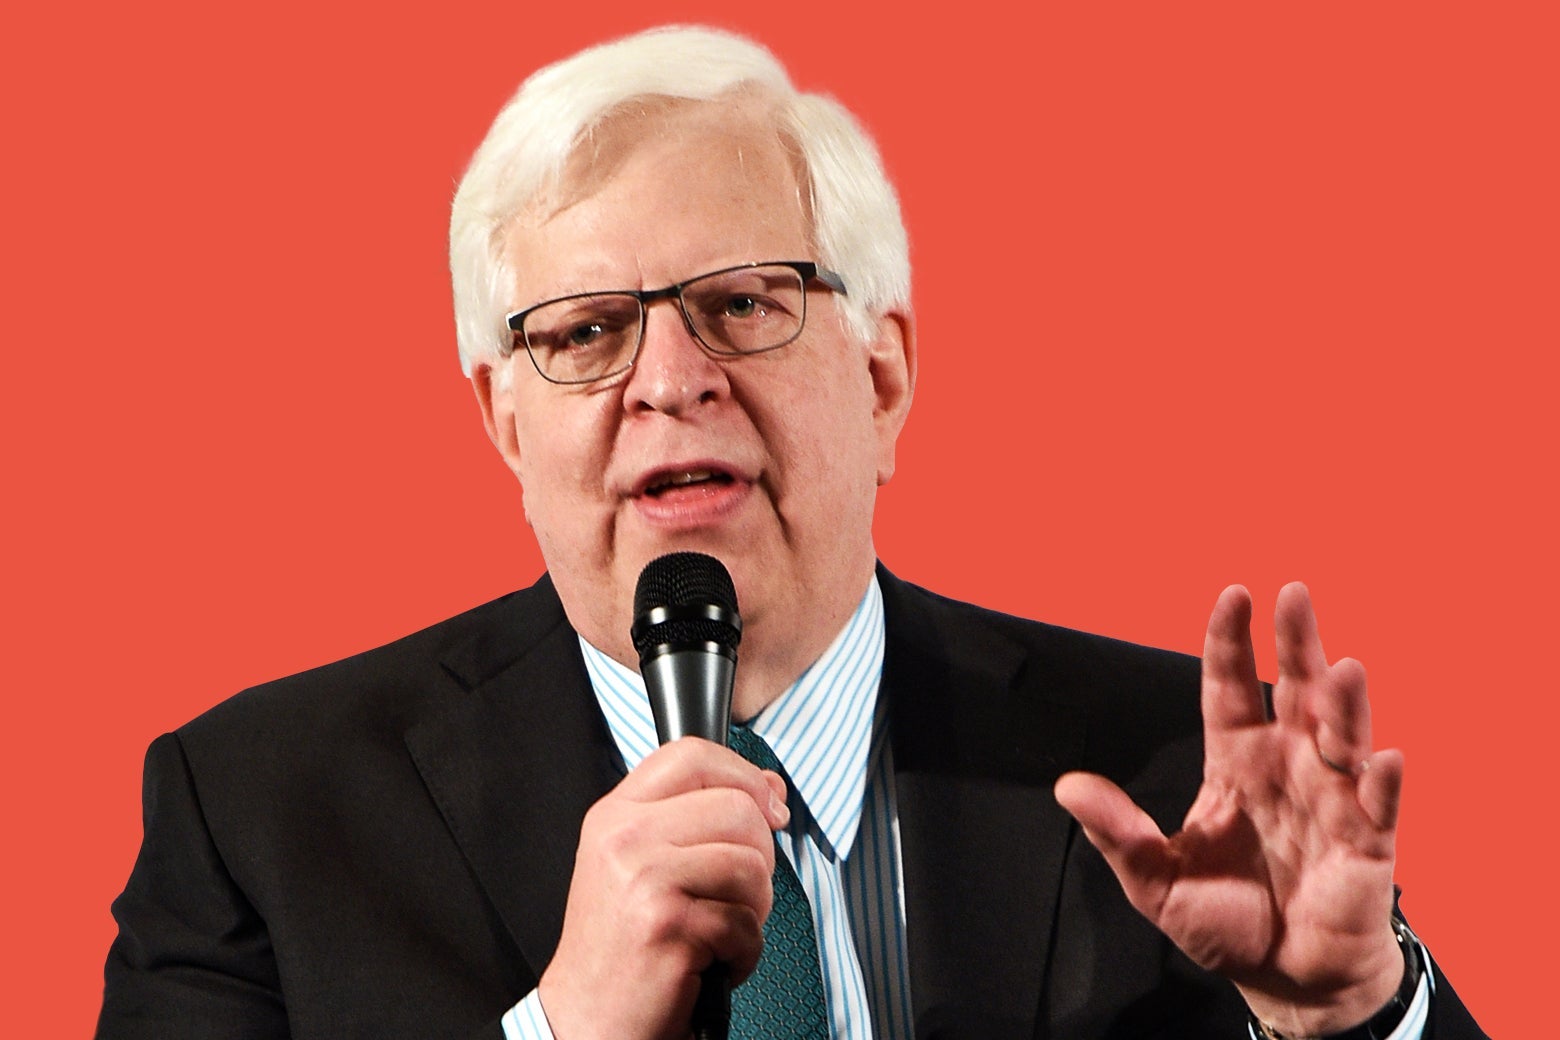 A white man with white hair and glasses holds up one hand while holding a microphone to his mouth with the other hand.